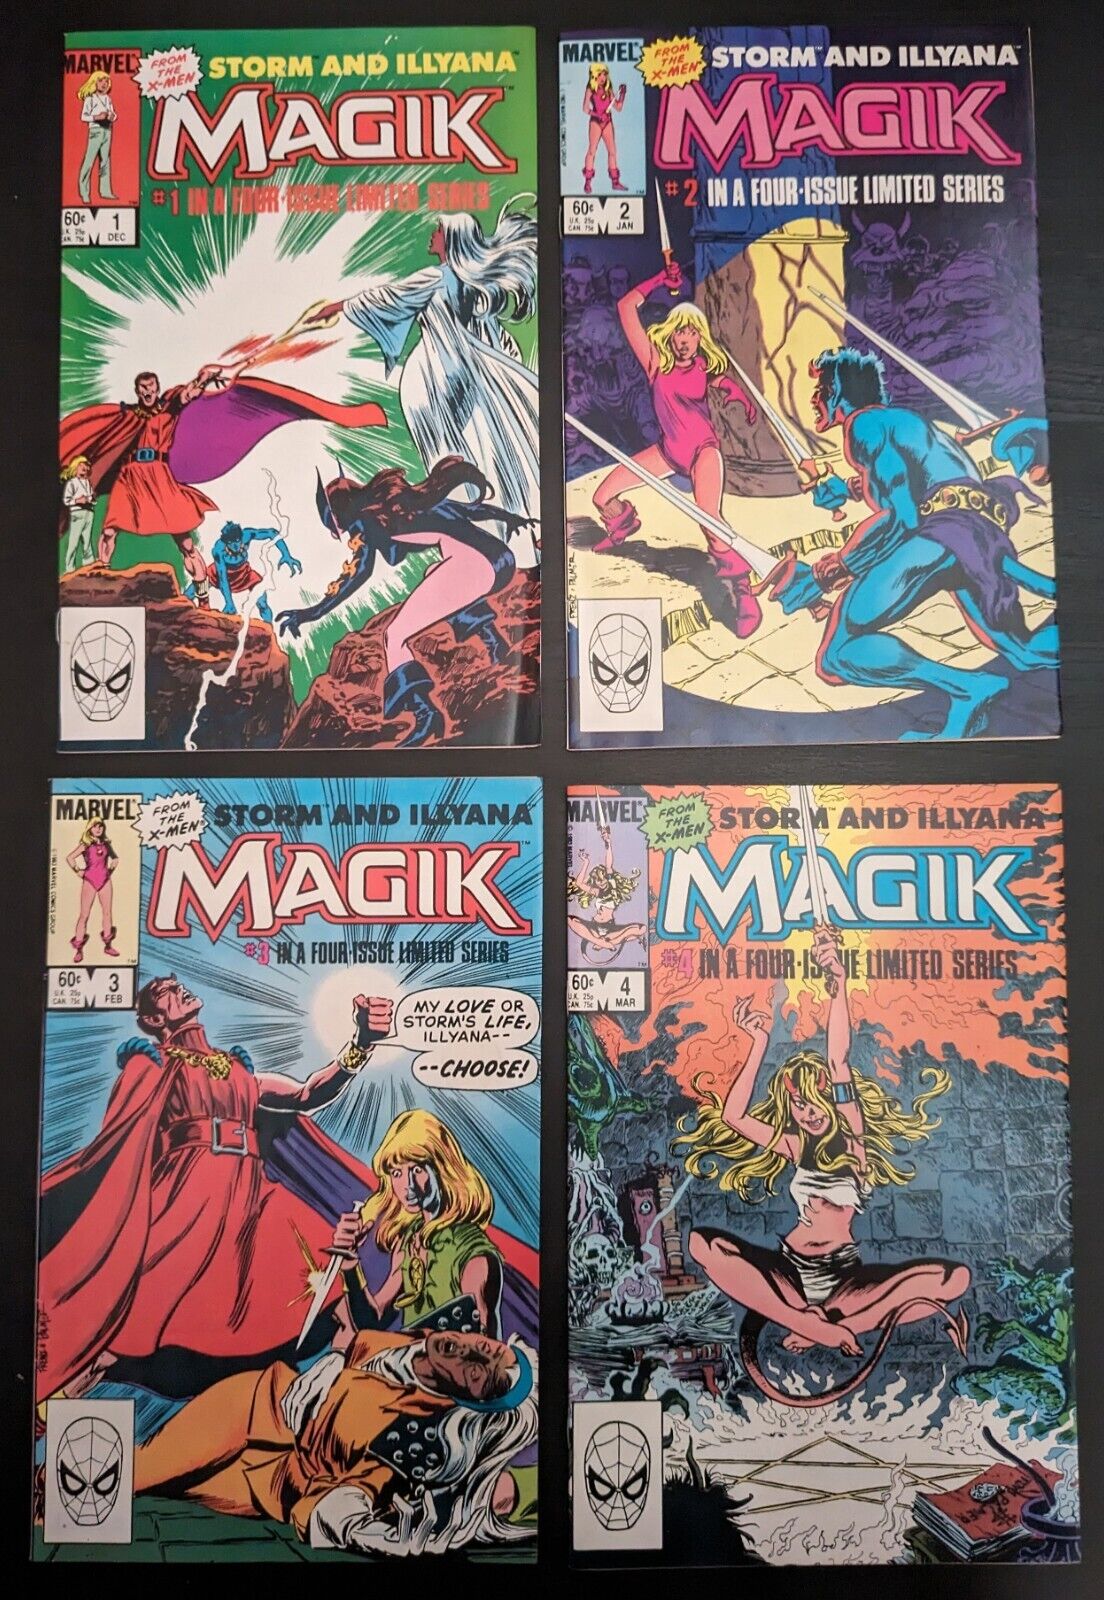 MAGIK (ILLYANA AND STORM) COMPLETE LIMITED SERIES #1 - 4 1983, Marvel Comics